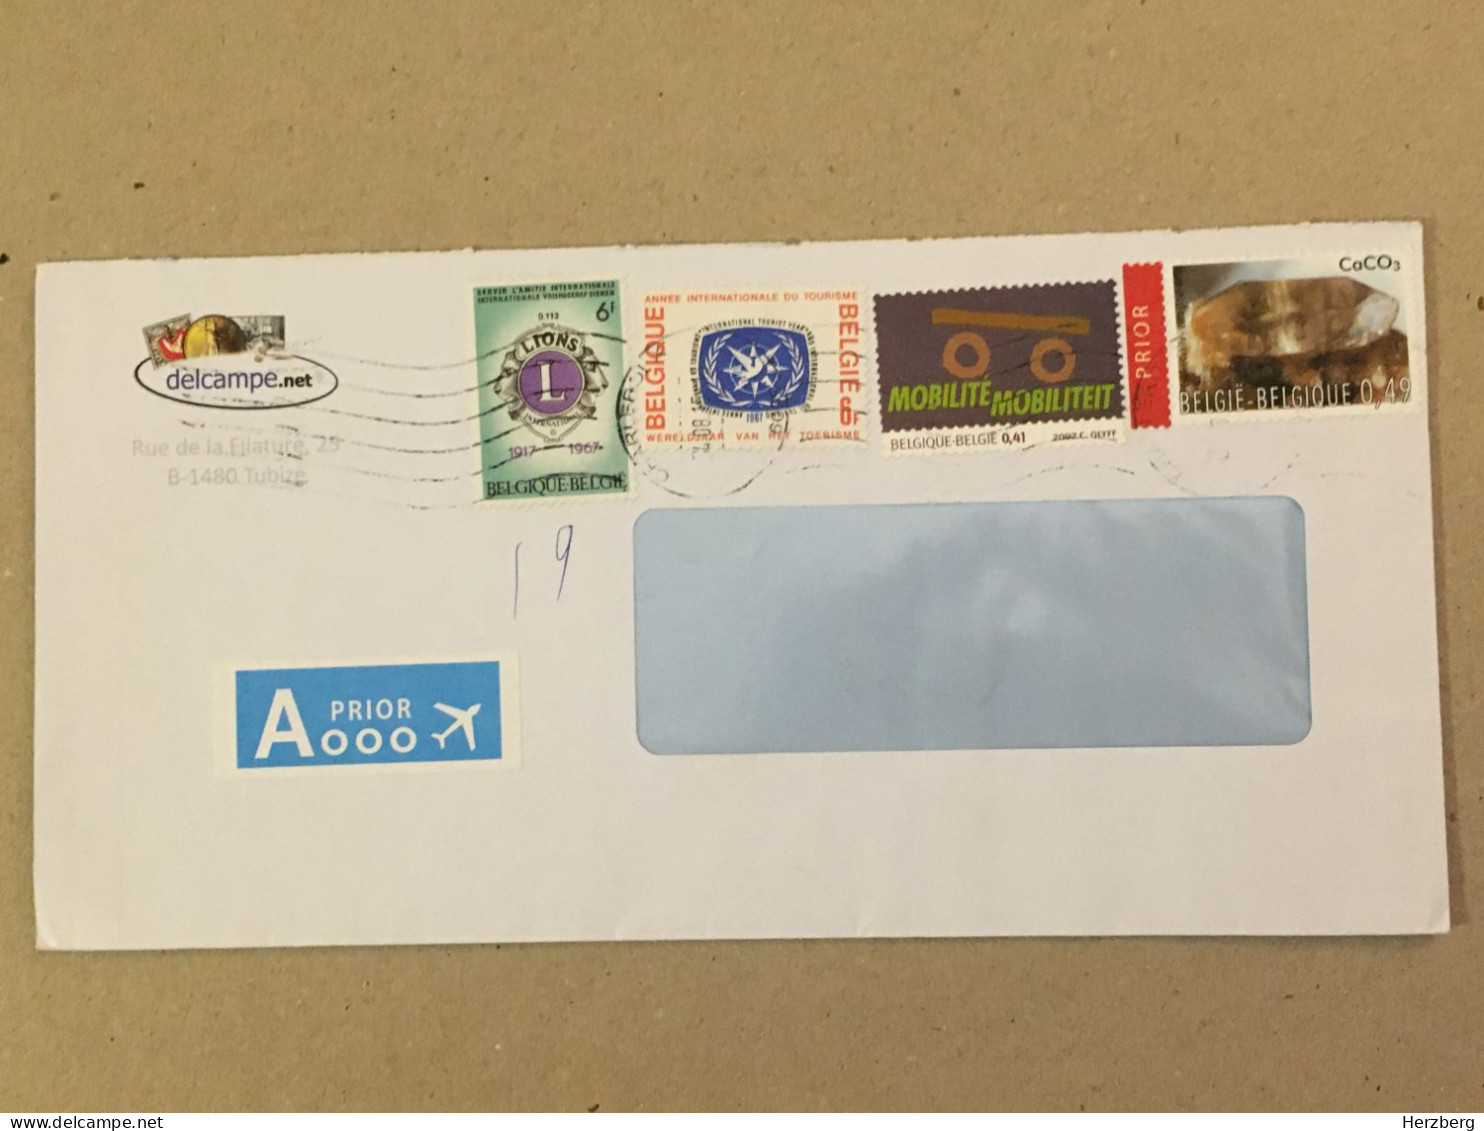 Belgie Belgique Used Letter Stamp On Cover Priority Lions Club International Tourist Year 1967 Calcium Carbonate 2015 - 2013-... Roi Philippe